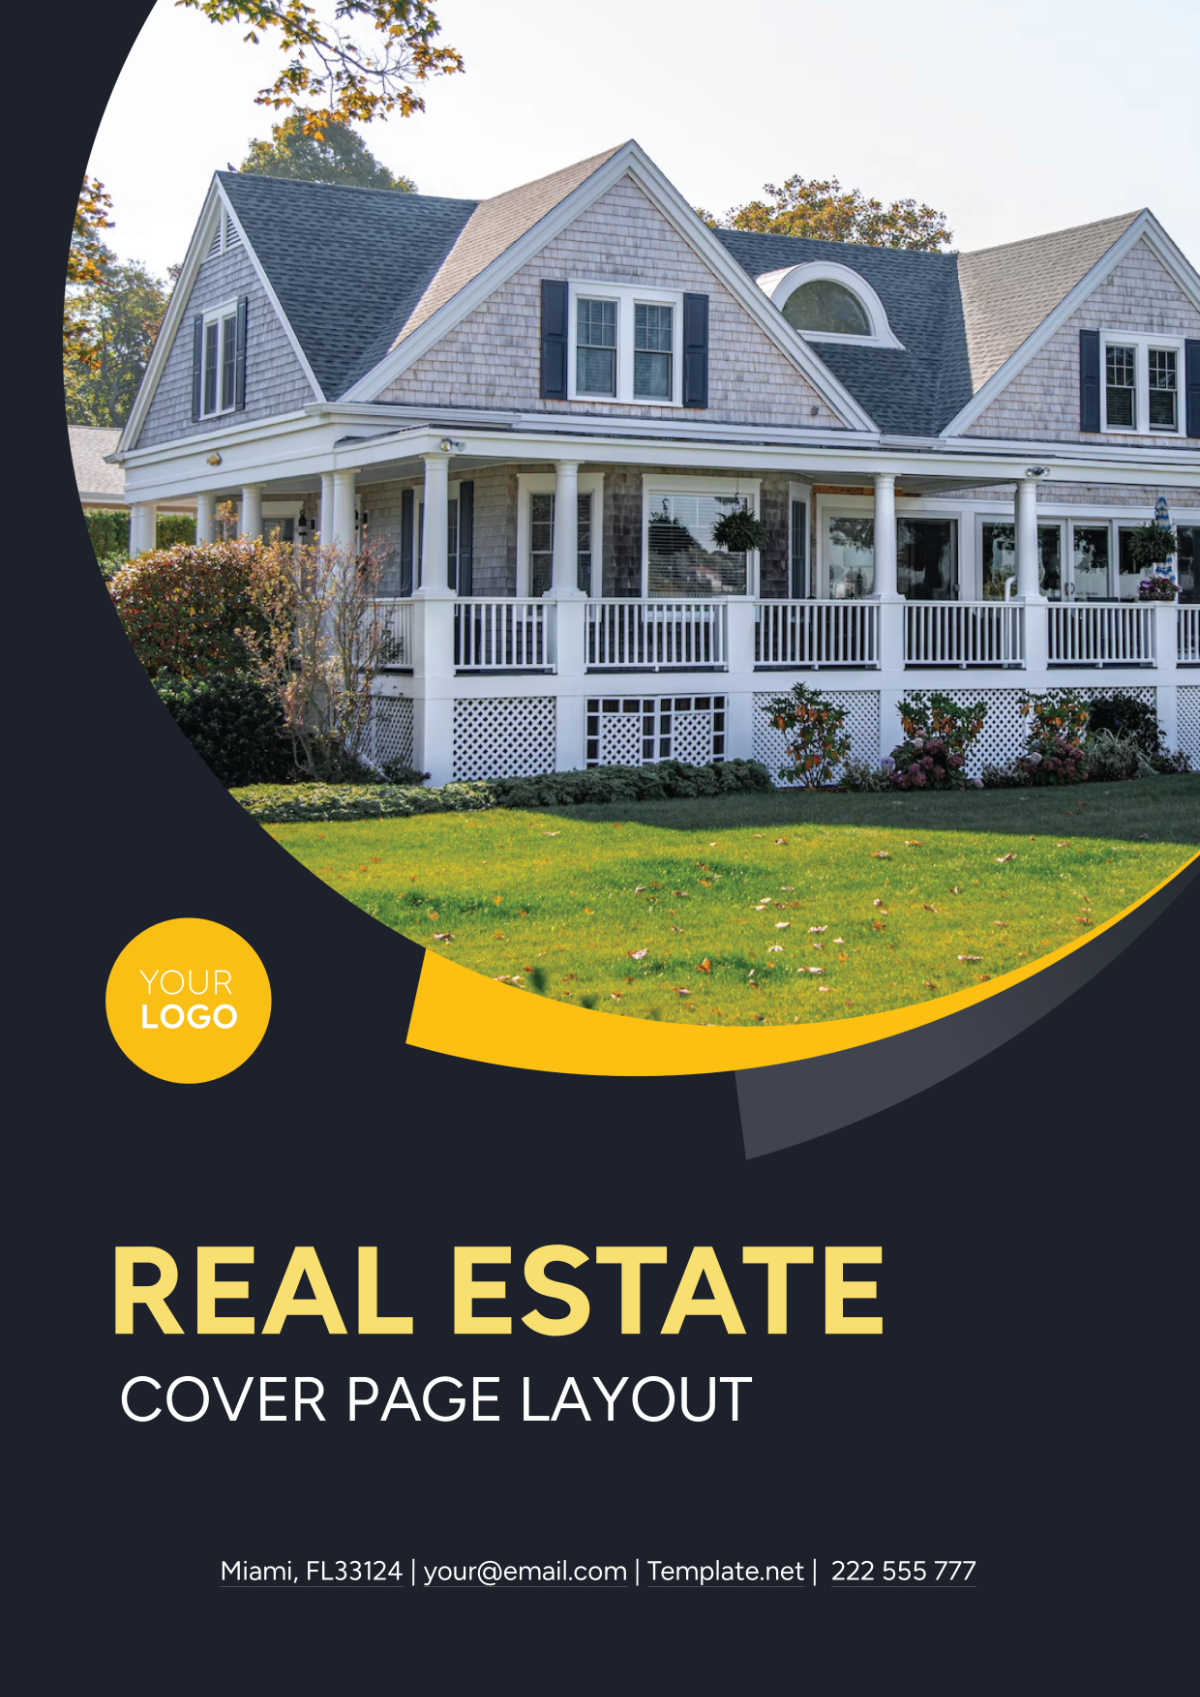 Real Estate Cover Page Layout Template